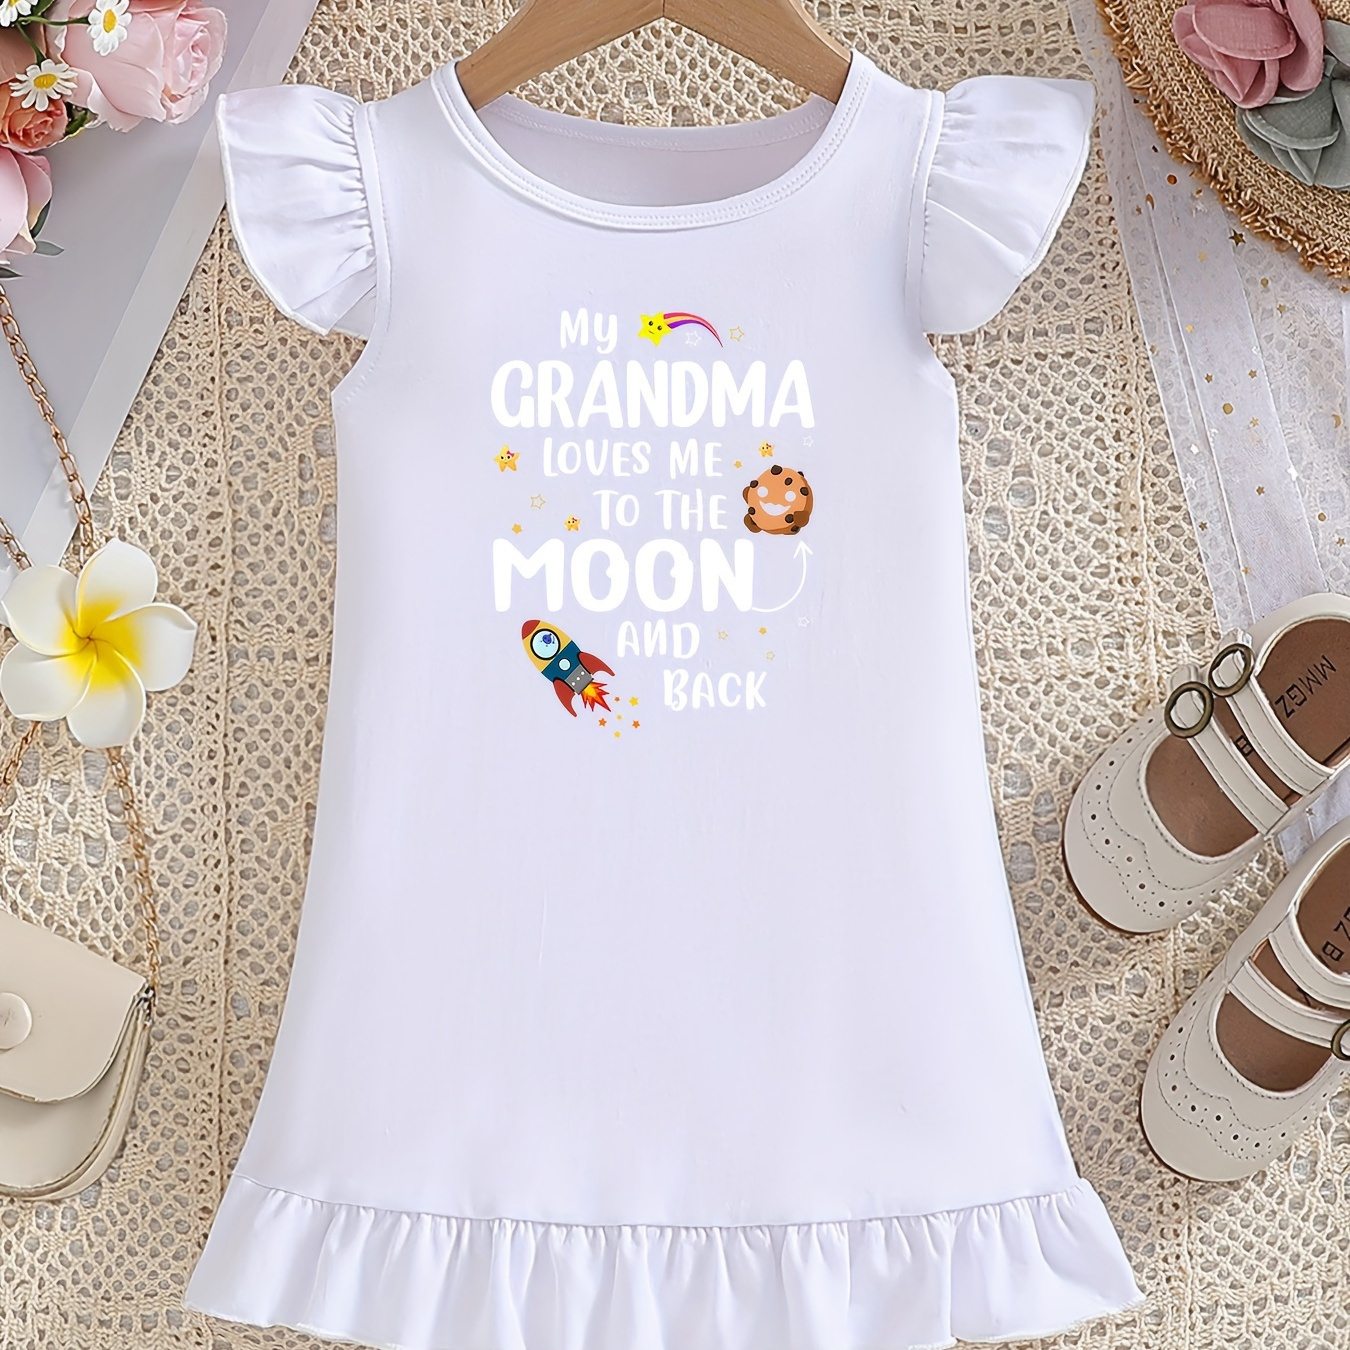 

Baby Girls' Ruffle Sleeve Round Neck Dress, Cotton Loose-fit Fashion Cartoon Rocket & My Grandma Loves Me Letter Print, Cute Style